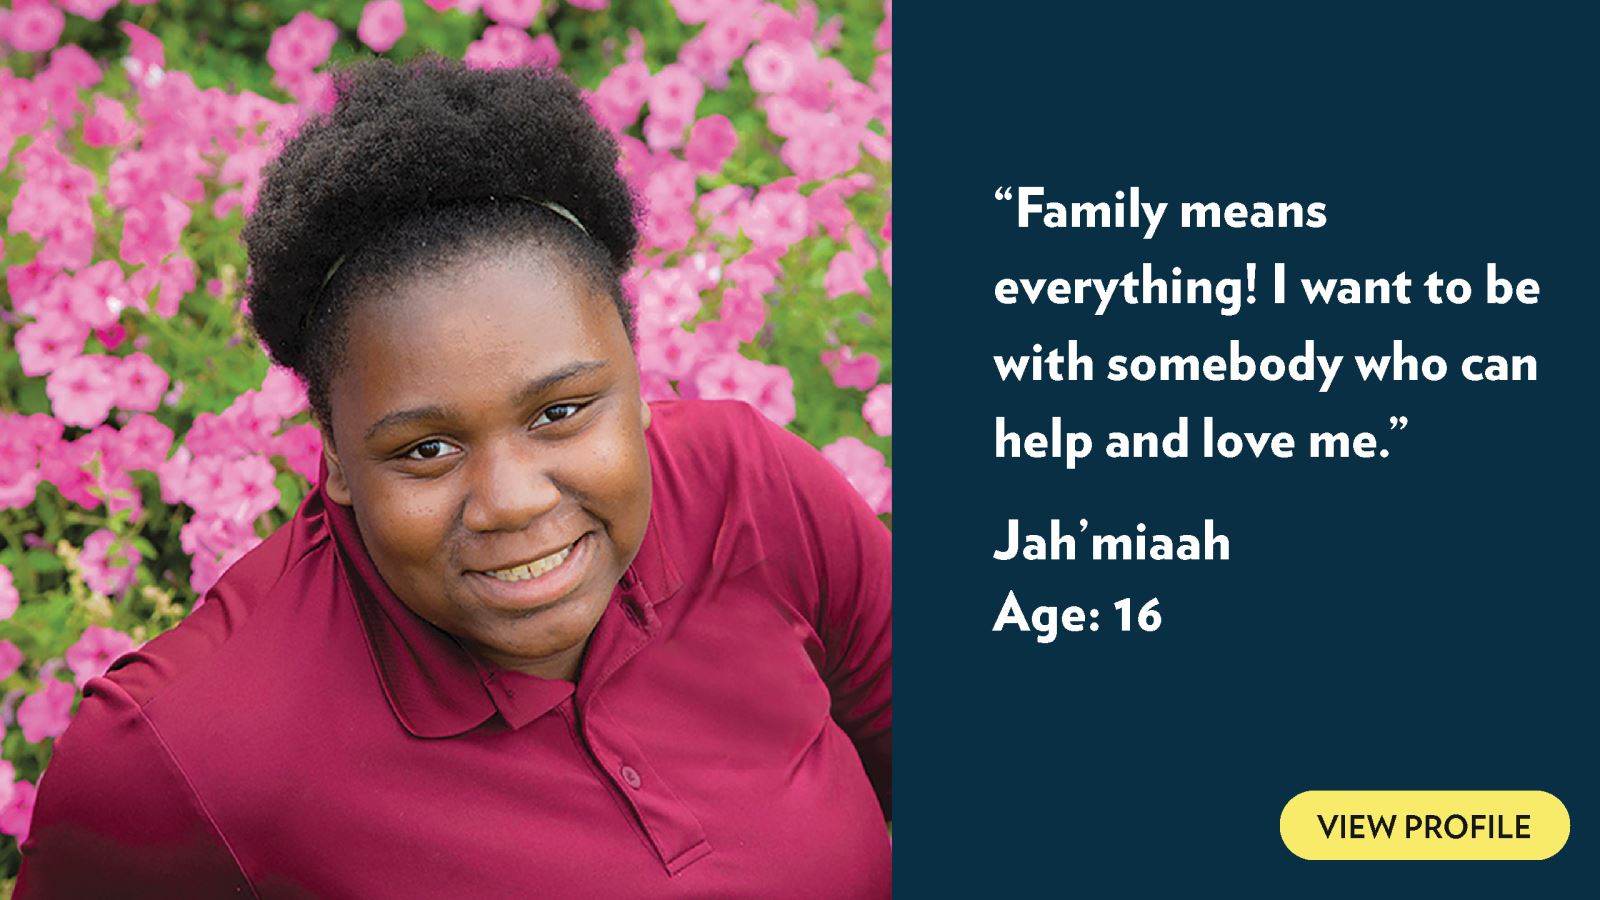 Family means everything! I want to be with somebody who can help and love me. Jah'miaah, age 16. View profile.